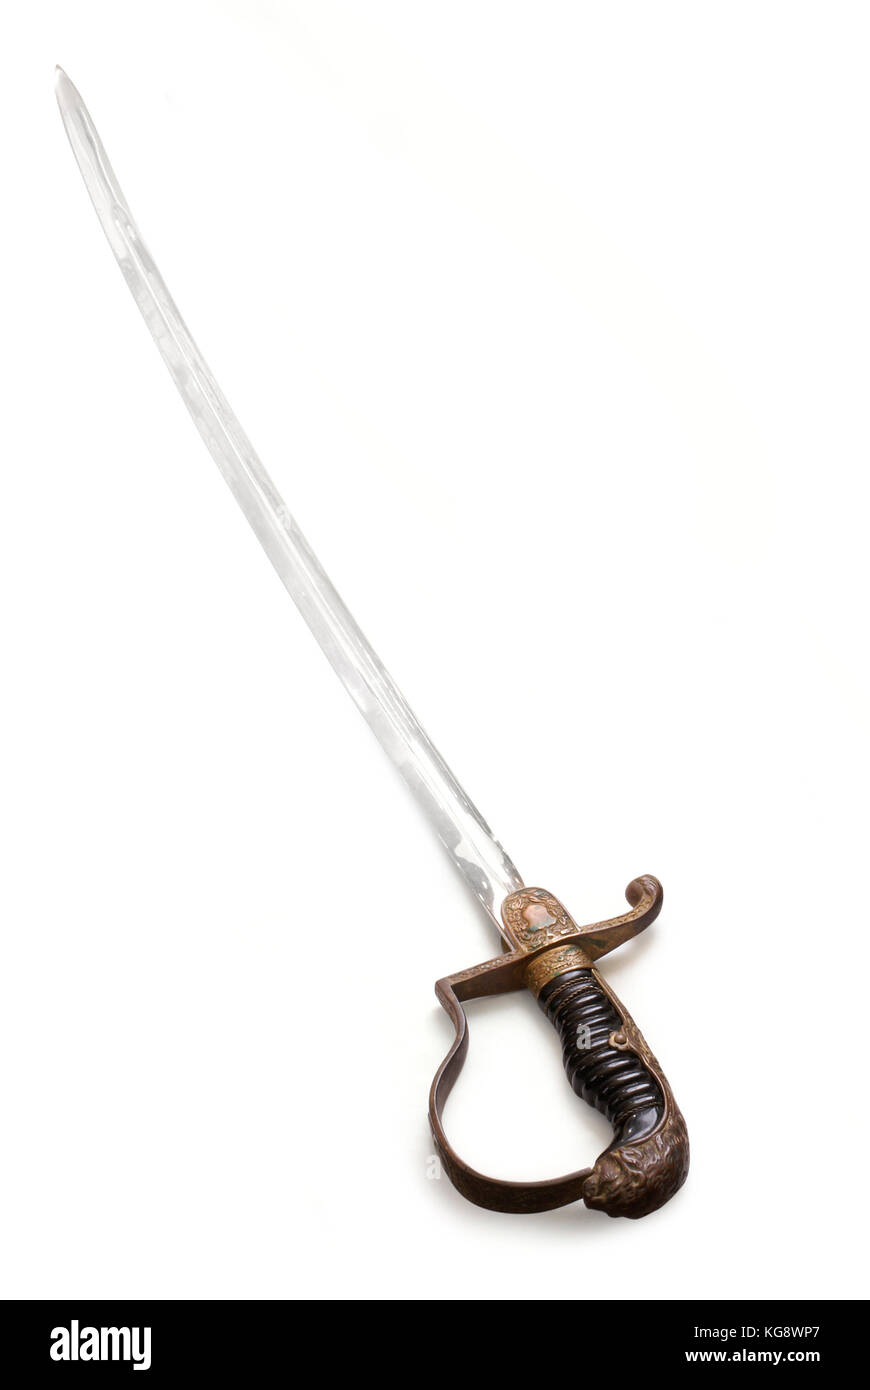 German officer saber (sabre).The 19th - 20th century. Germany. Path on the white background. Stock Photo